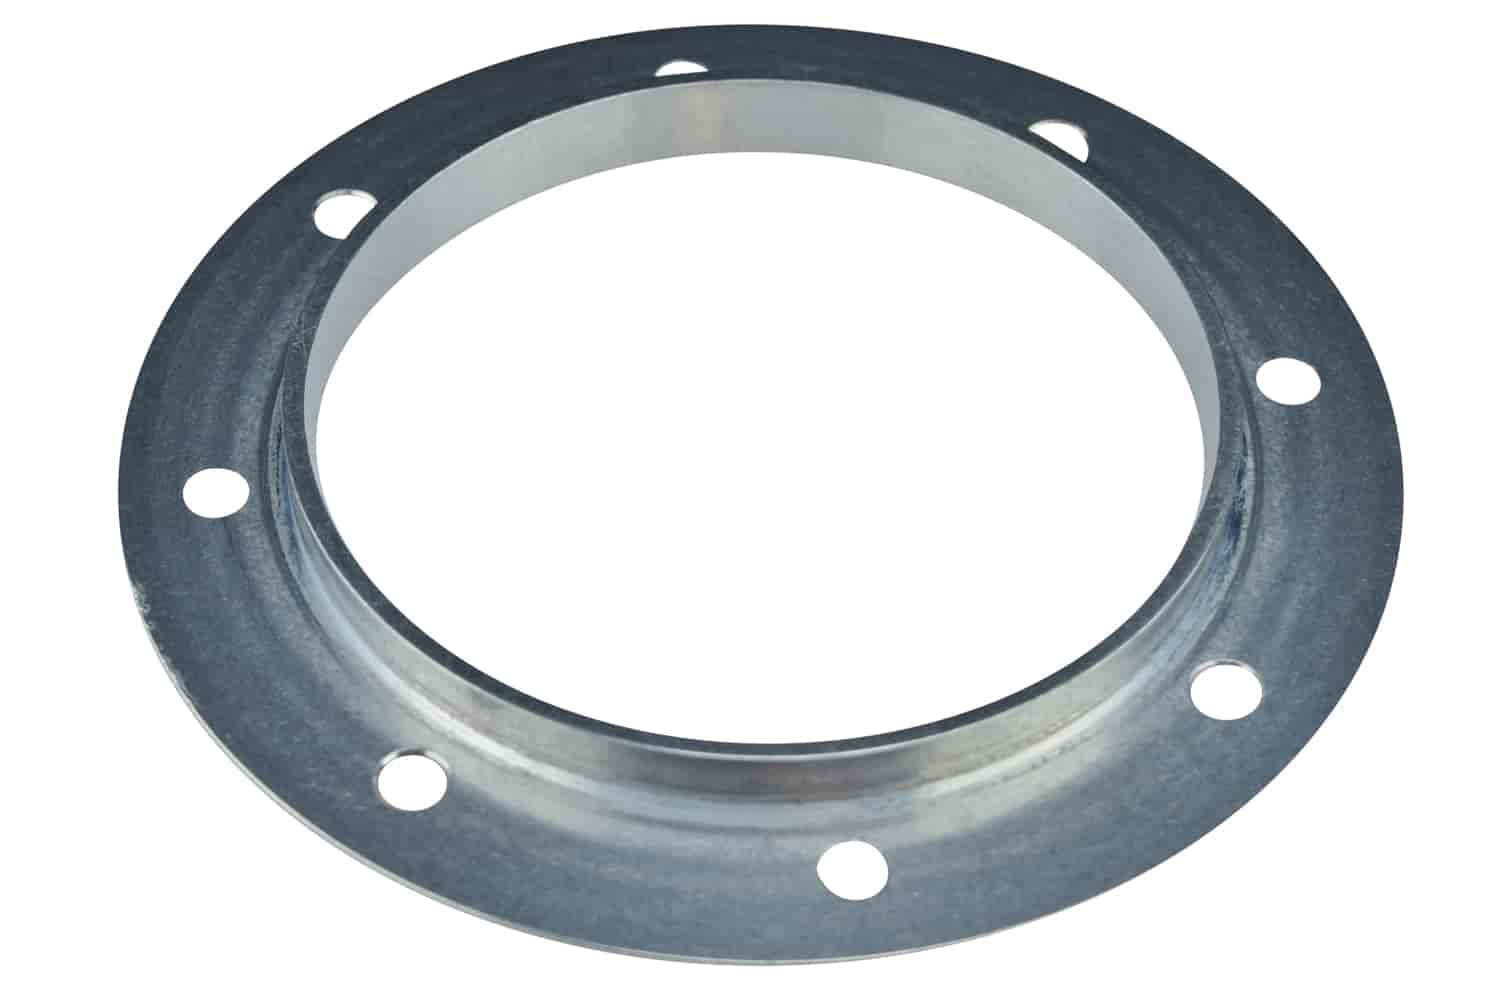 Exhaust Pipe Fender Exit Bezel for 4" Turbo Downpipe